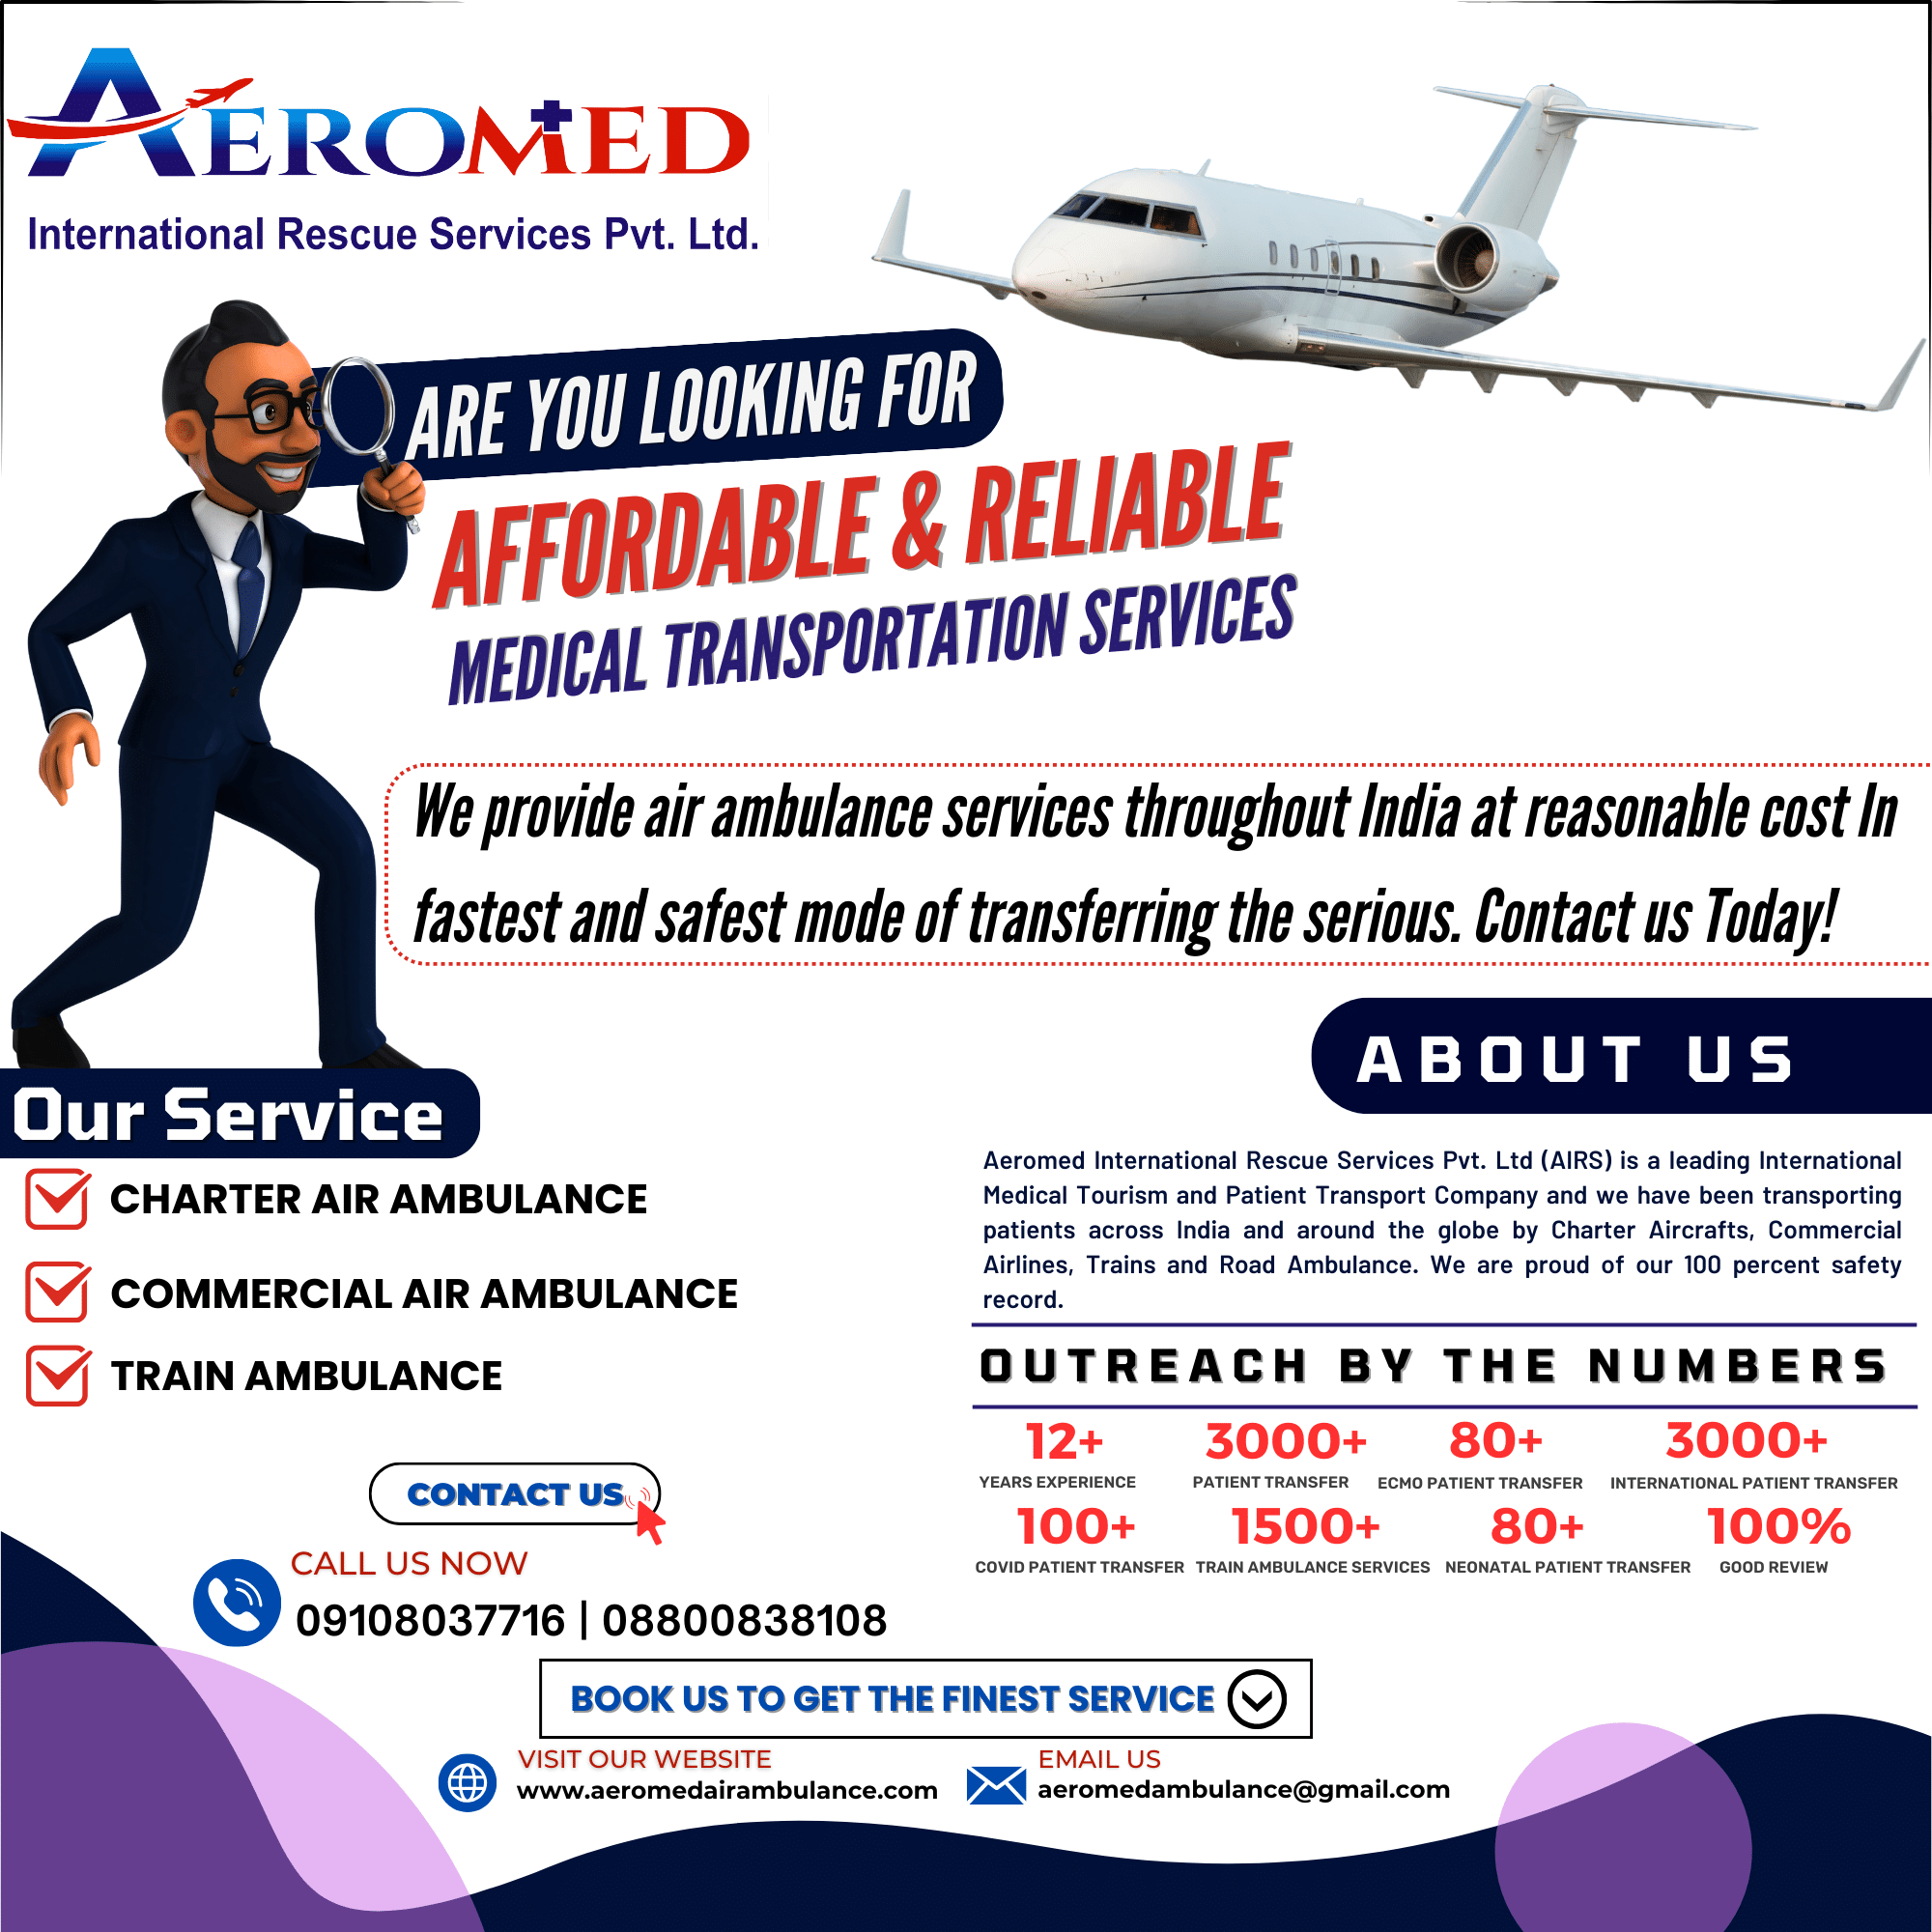 Aeromed Air Ambulance Service in Guwahati - Stop Looking Other Medical Flights!